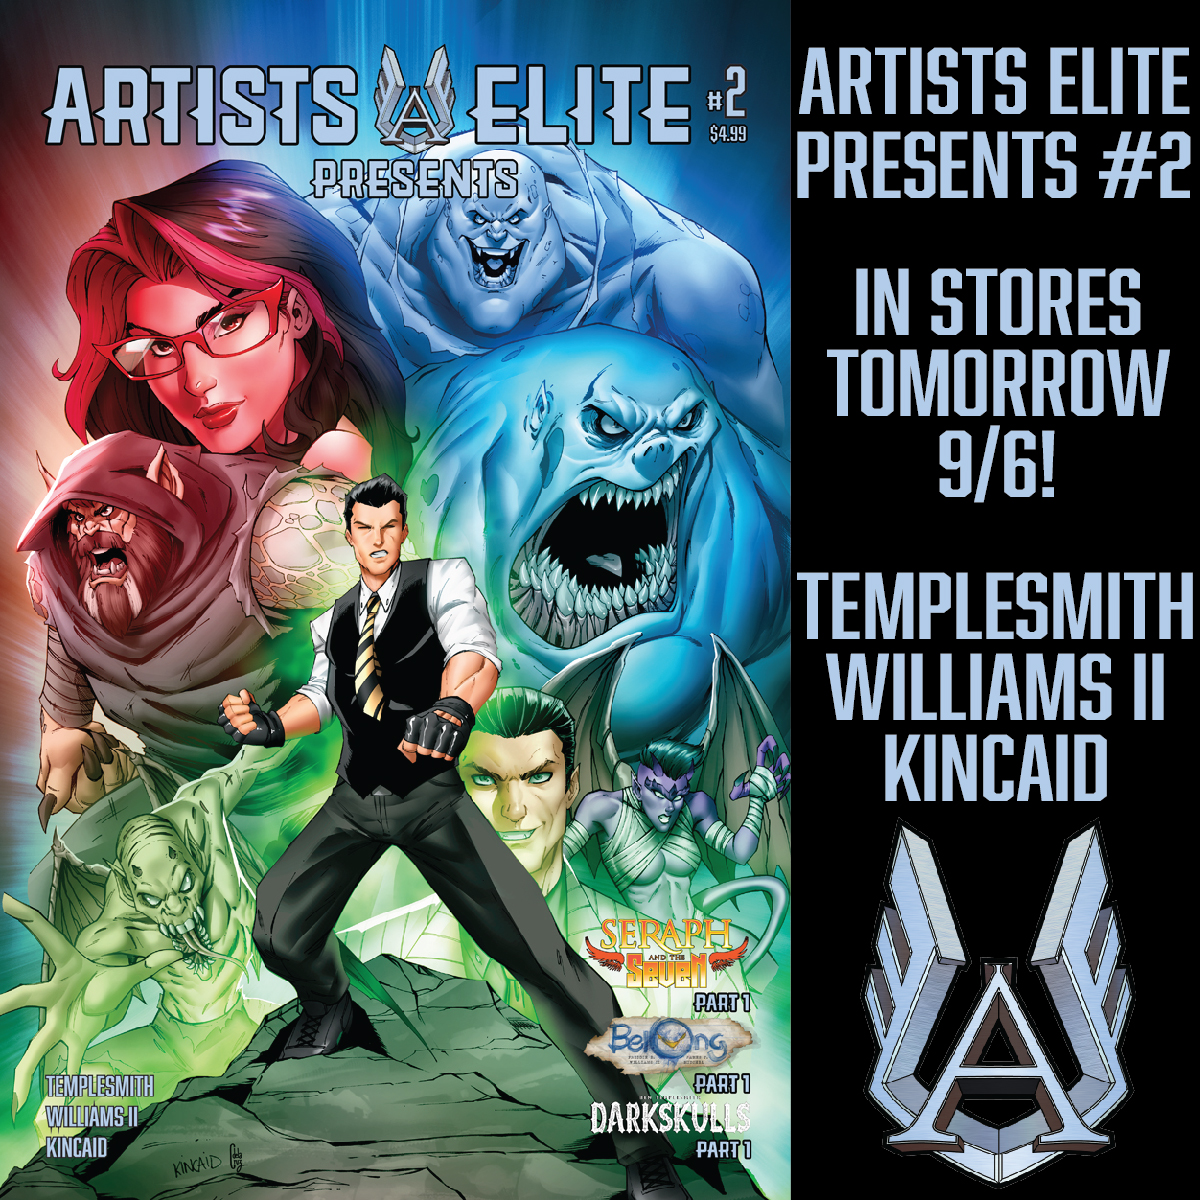 In stores TOMORROW! Artists Elite Presents #2 featuring the debuts of Seraph and the Seven by @RyanMKincaid plus Darkskulls by @Templesmith and Belong by @Freddieart! #artistselitecomics #ryanmkincaid #seraphandtheseven #BenTemplesmith #DarkSkulls #freddiewilliamsII #belong